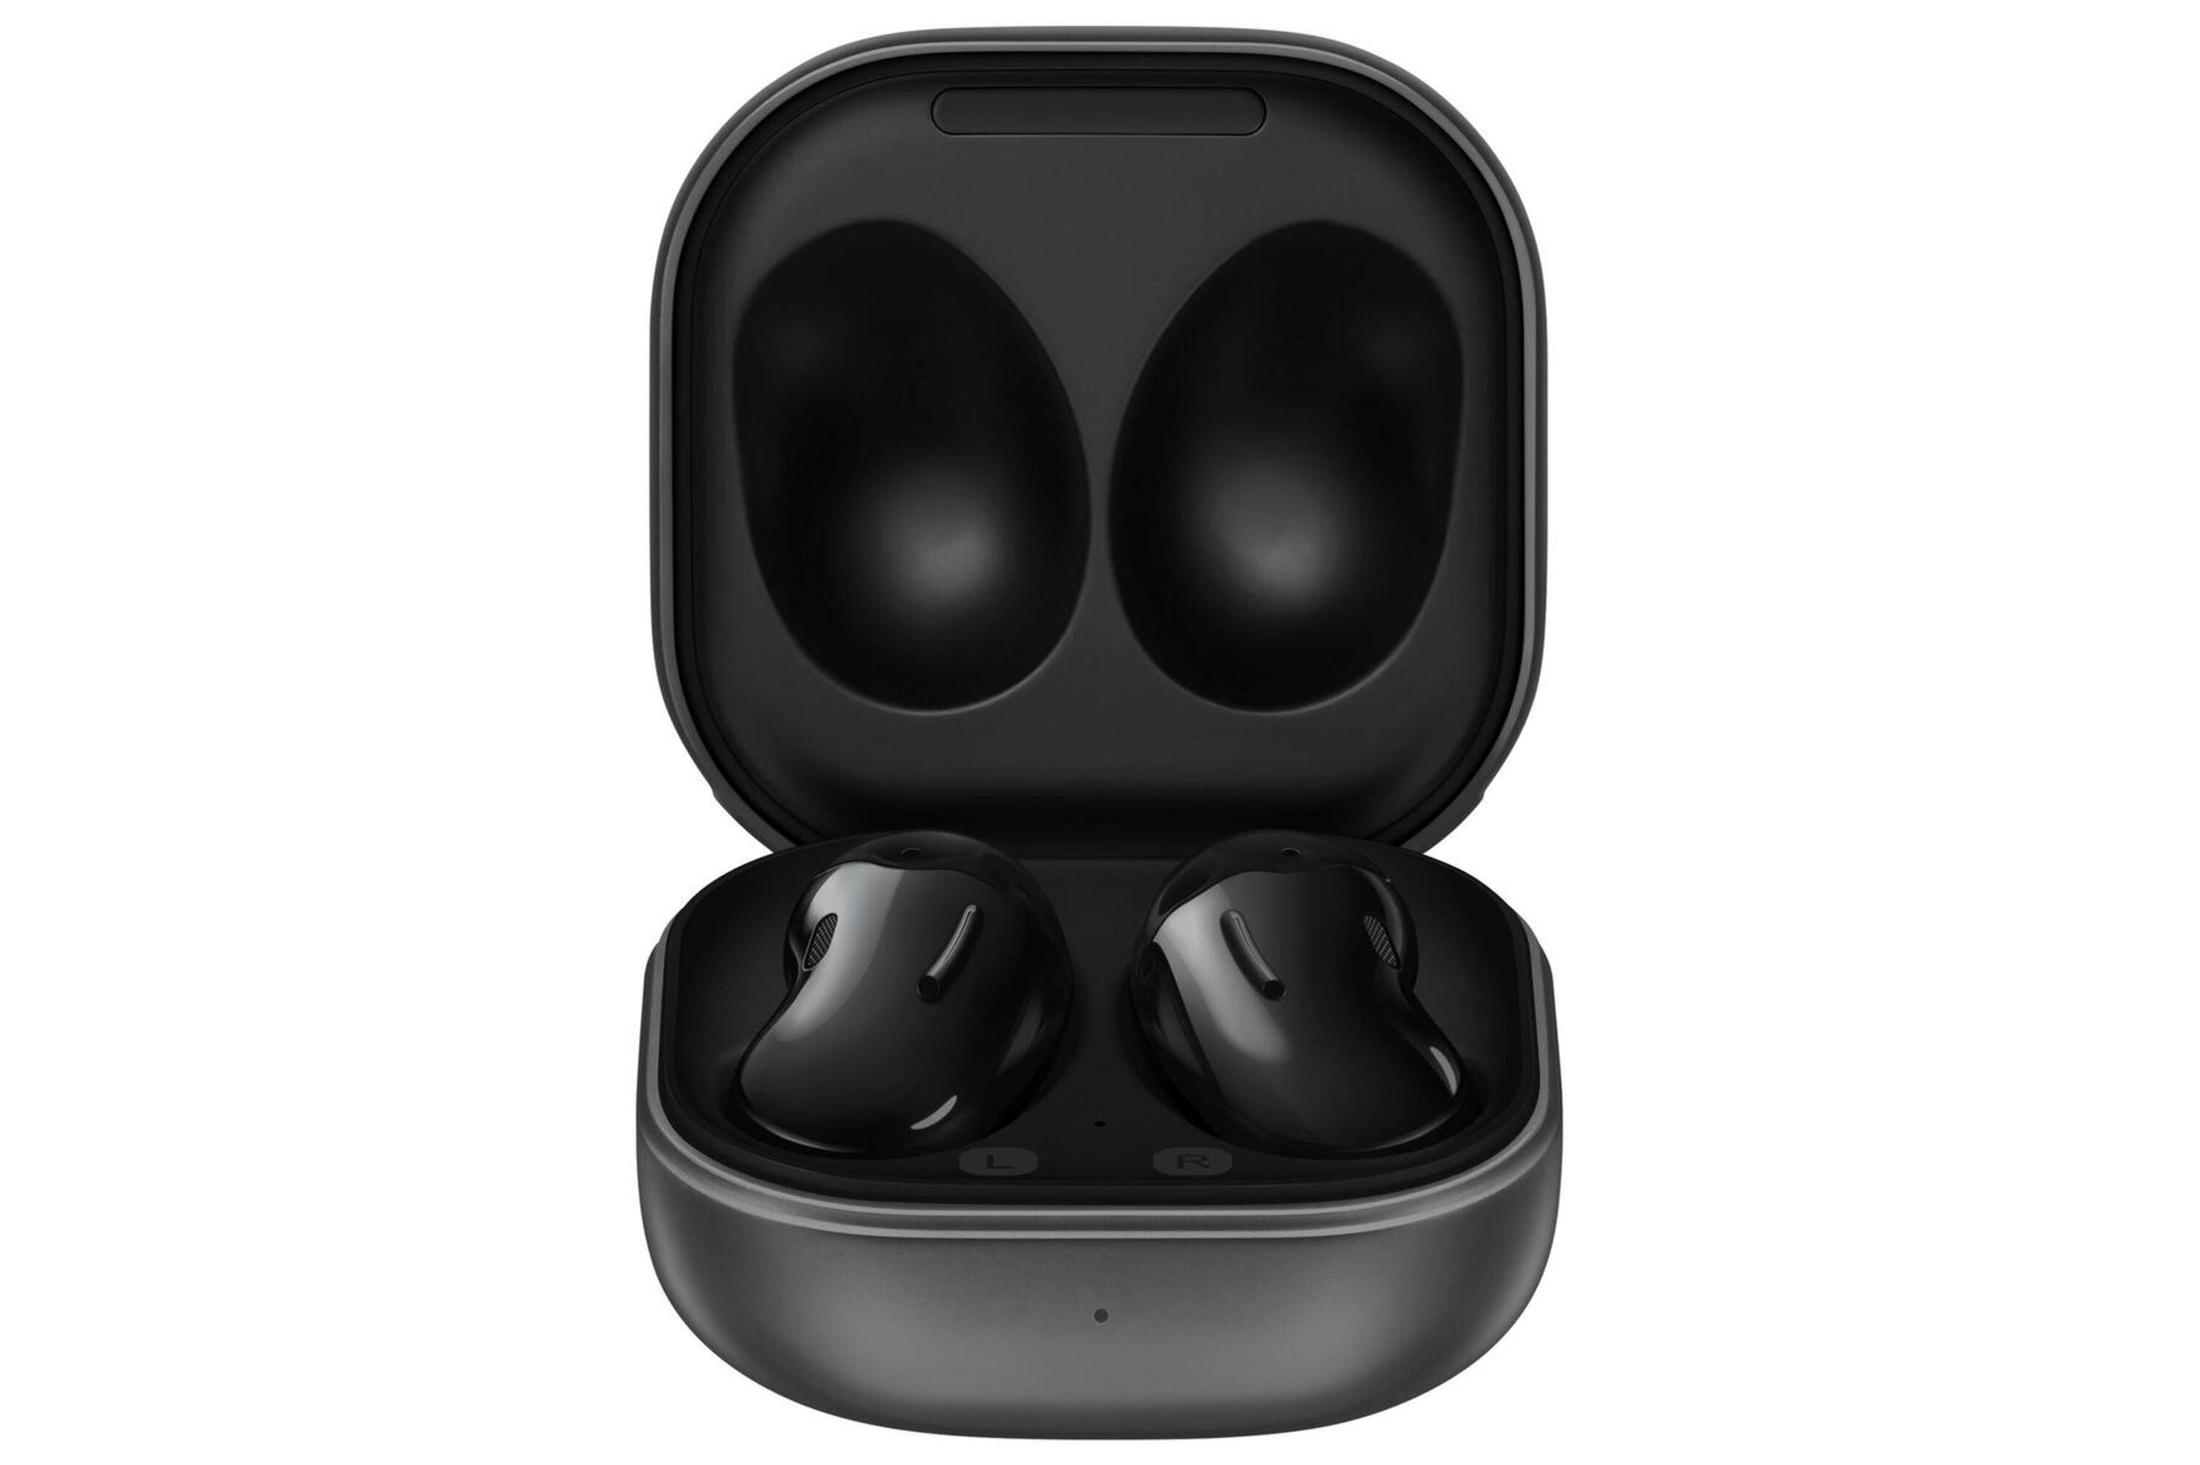 Samsung Galaxy Buds Live Bluetooth Earbuds, Noise Canceling and True Wireless, Onyx Black - image 2 of 12